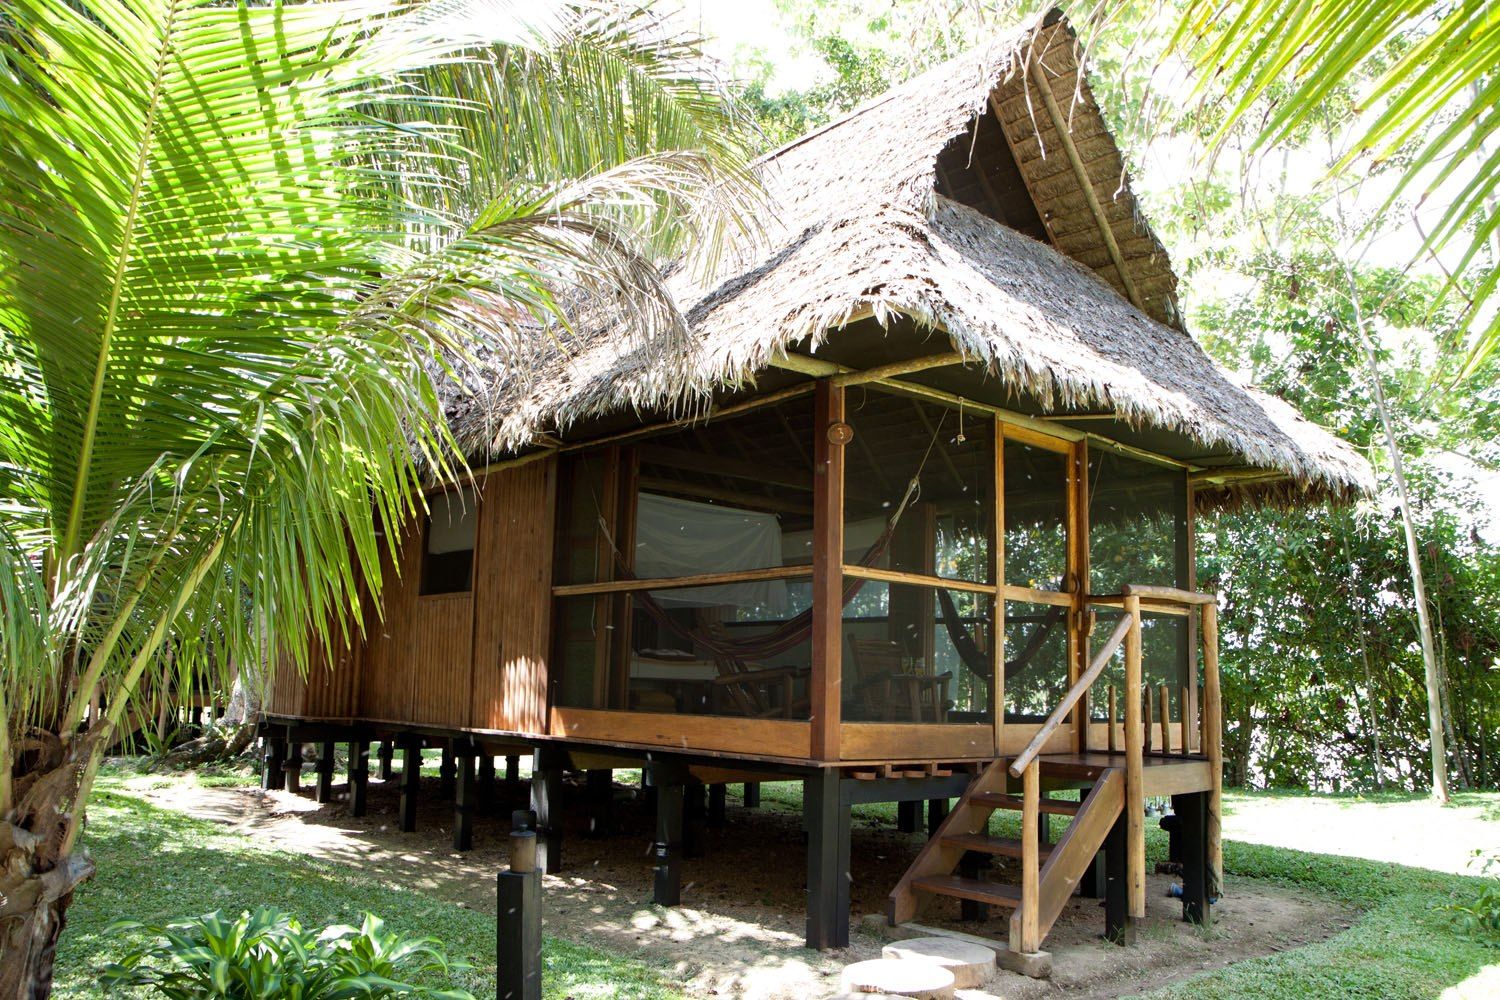 Our Cabana at the Inkaterra